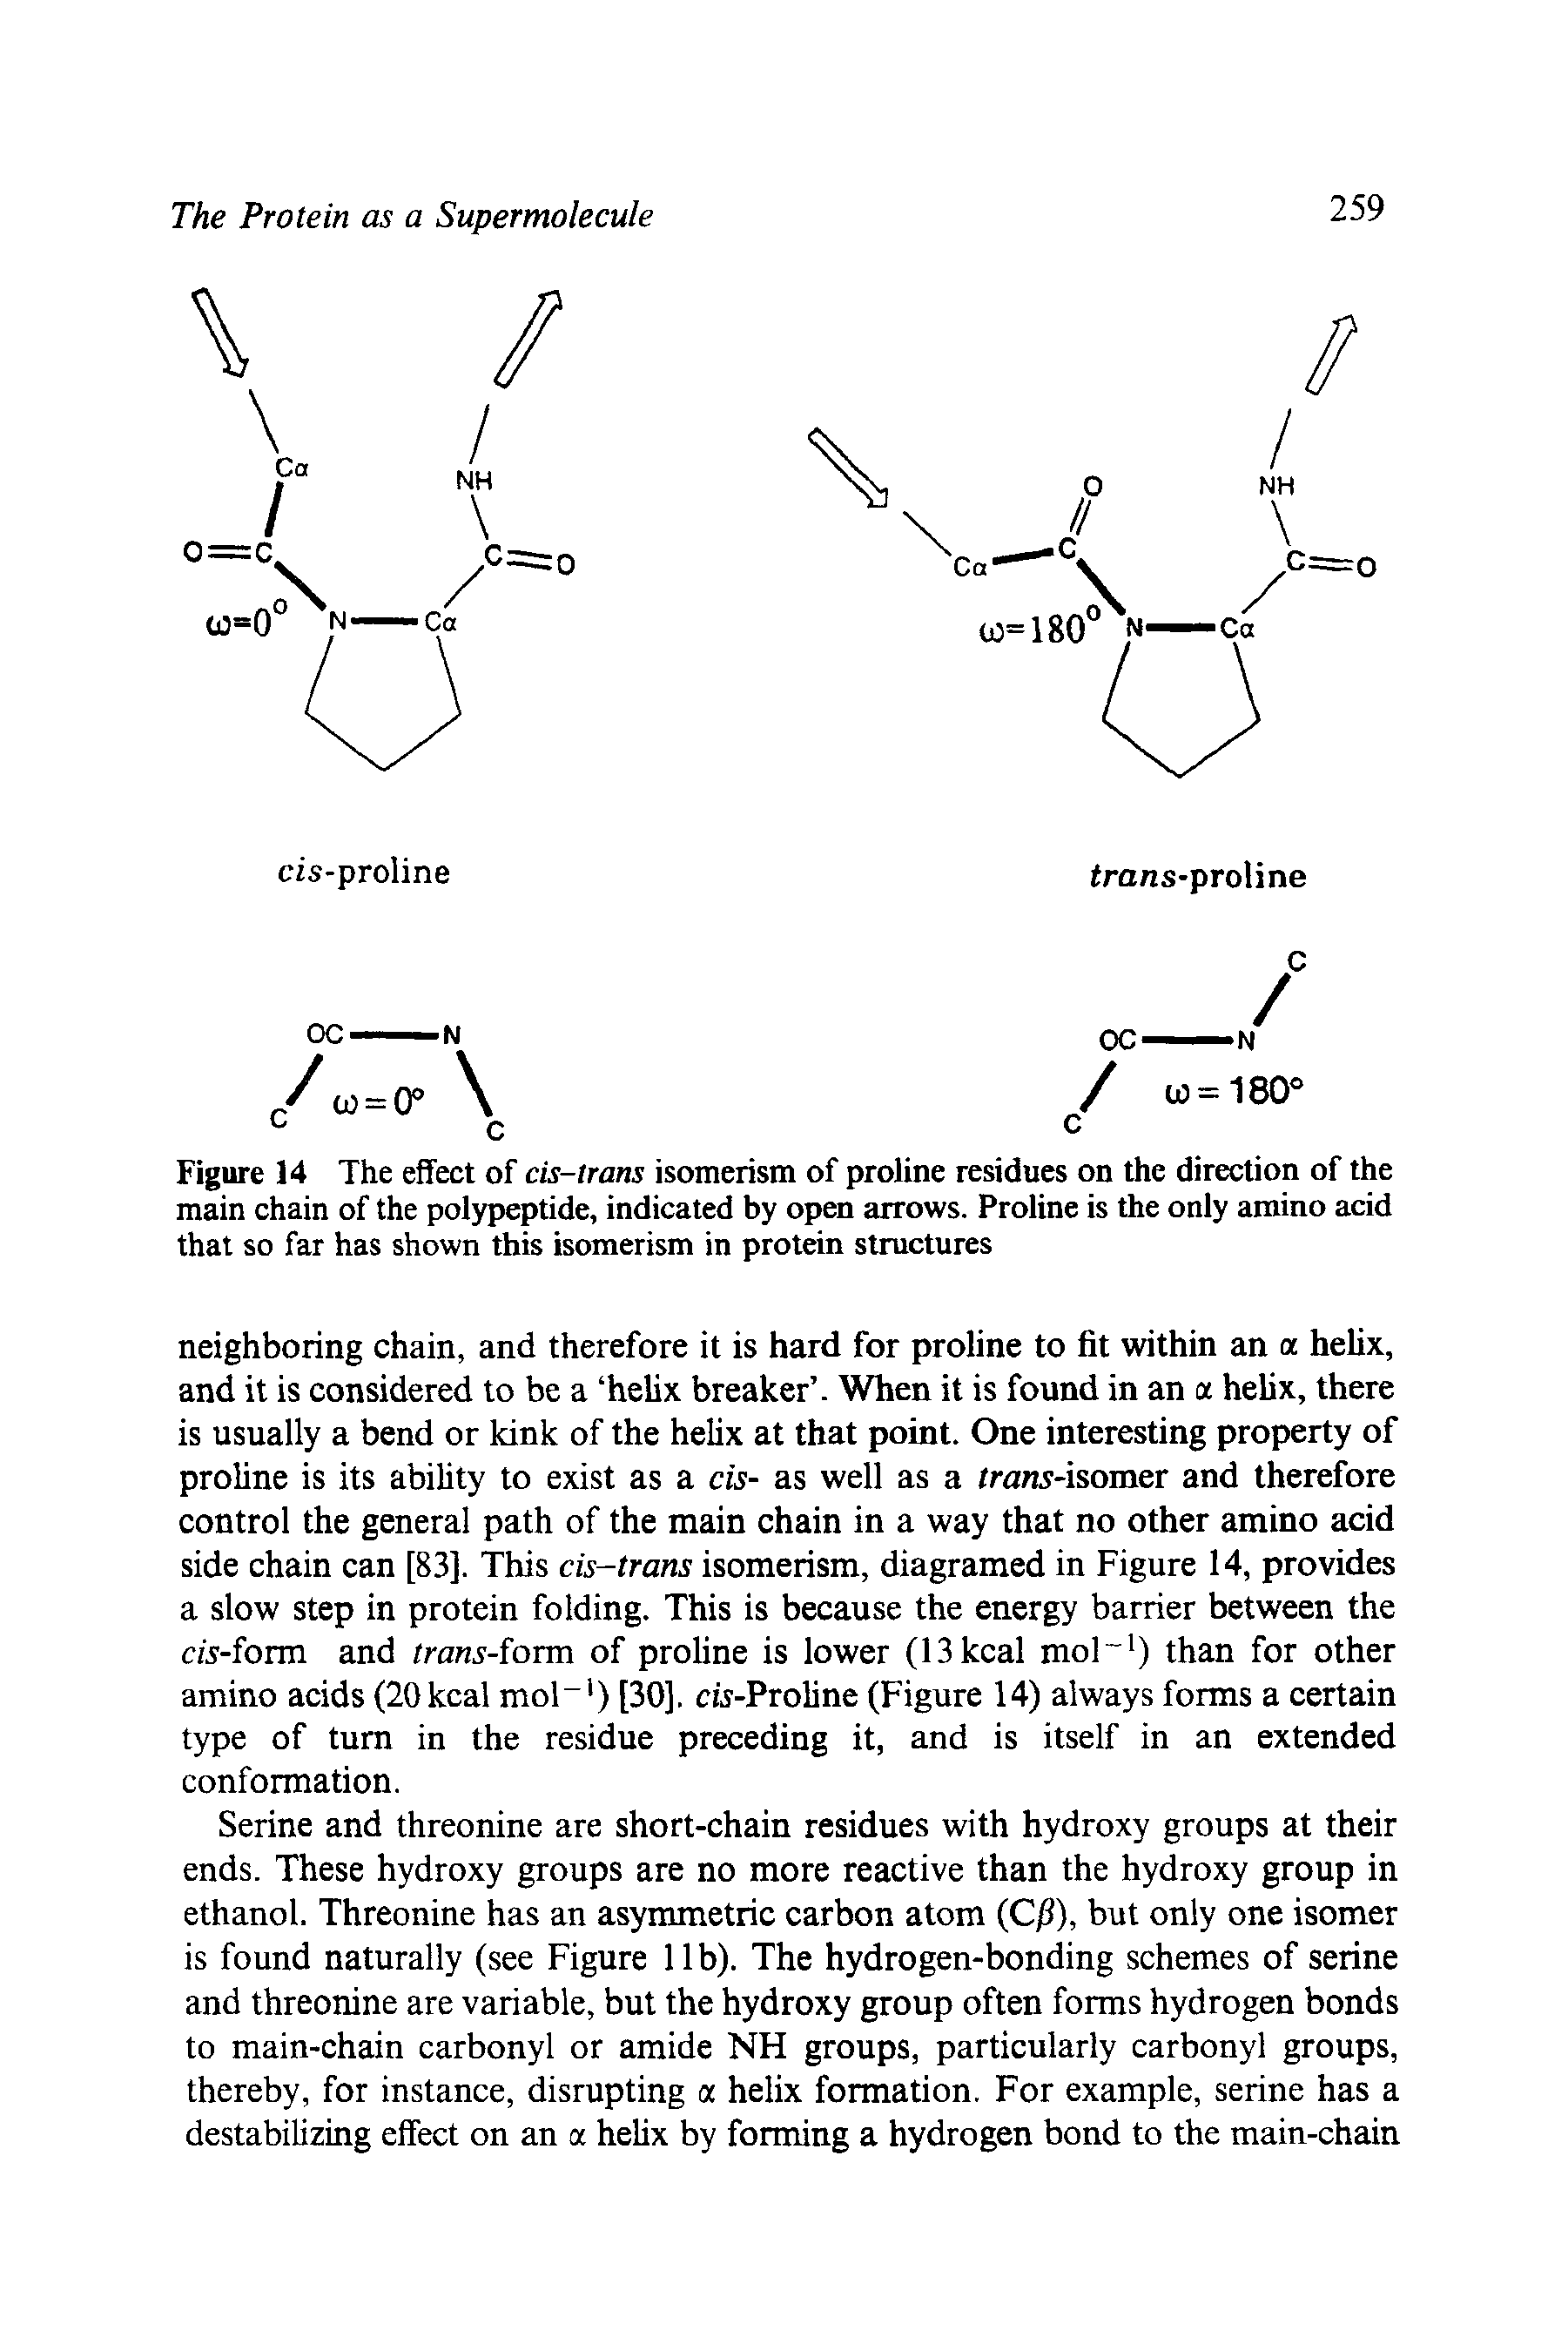 Figure 14 The effect of cis-irans isomerism of proline residues on the direction of the main chain of the poljrpeptide, indicated by open arrows. Proline is the only amino acid that so far has shown this isomerism in protein structures...